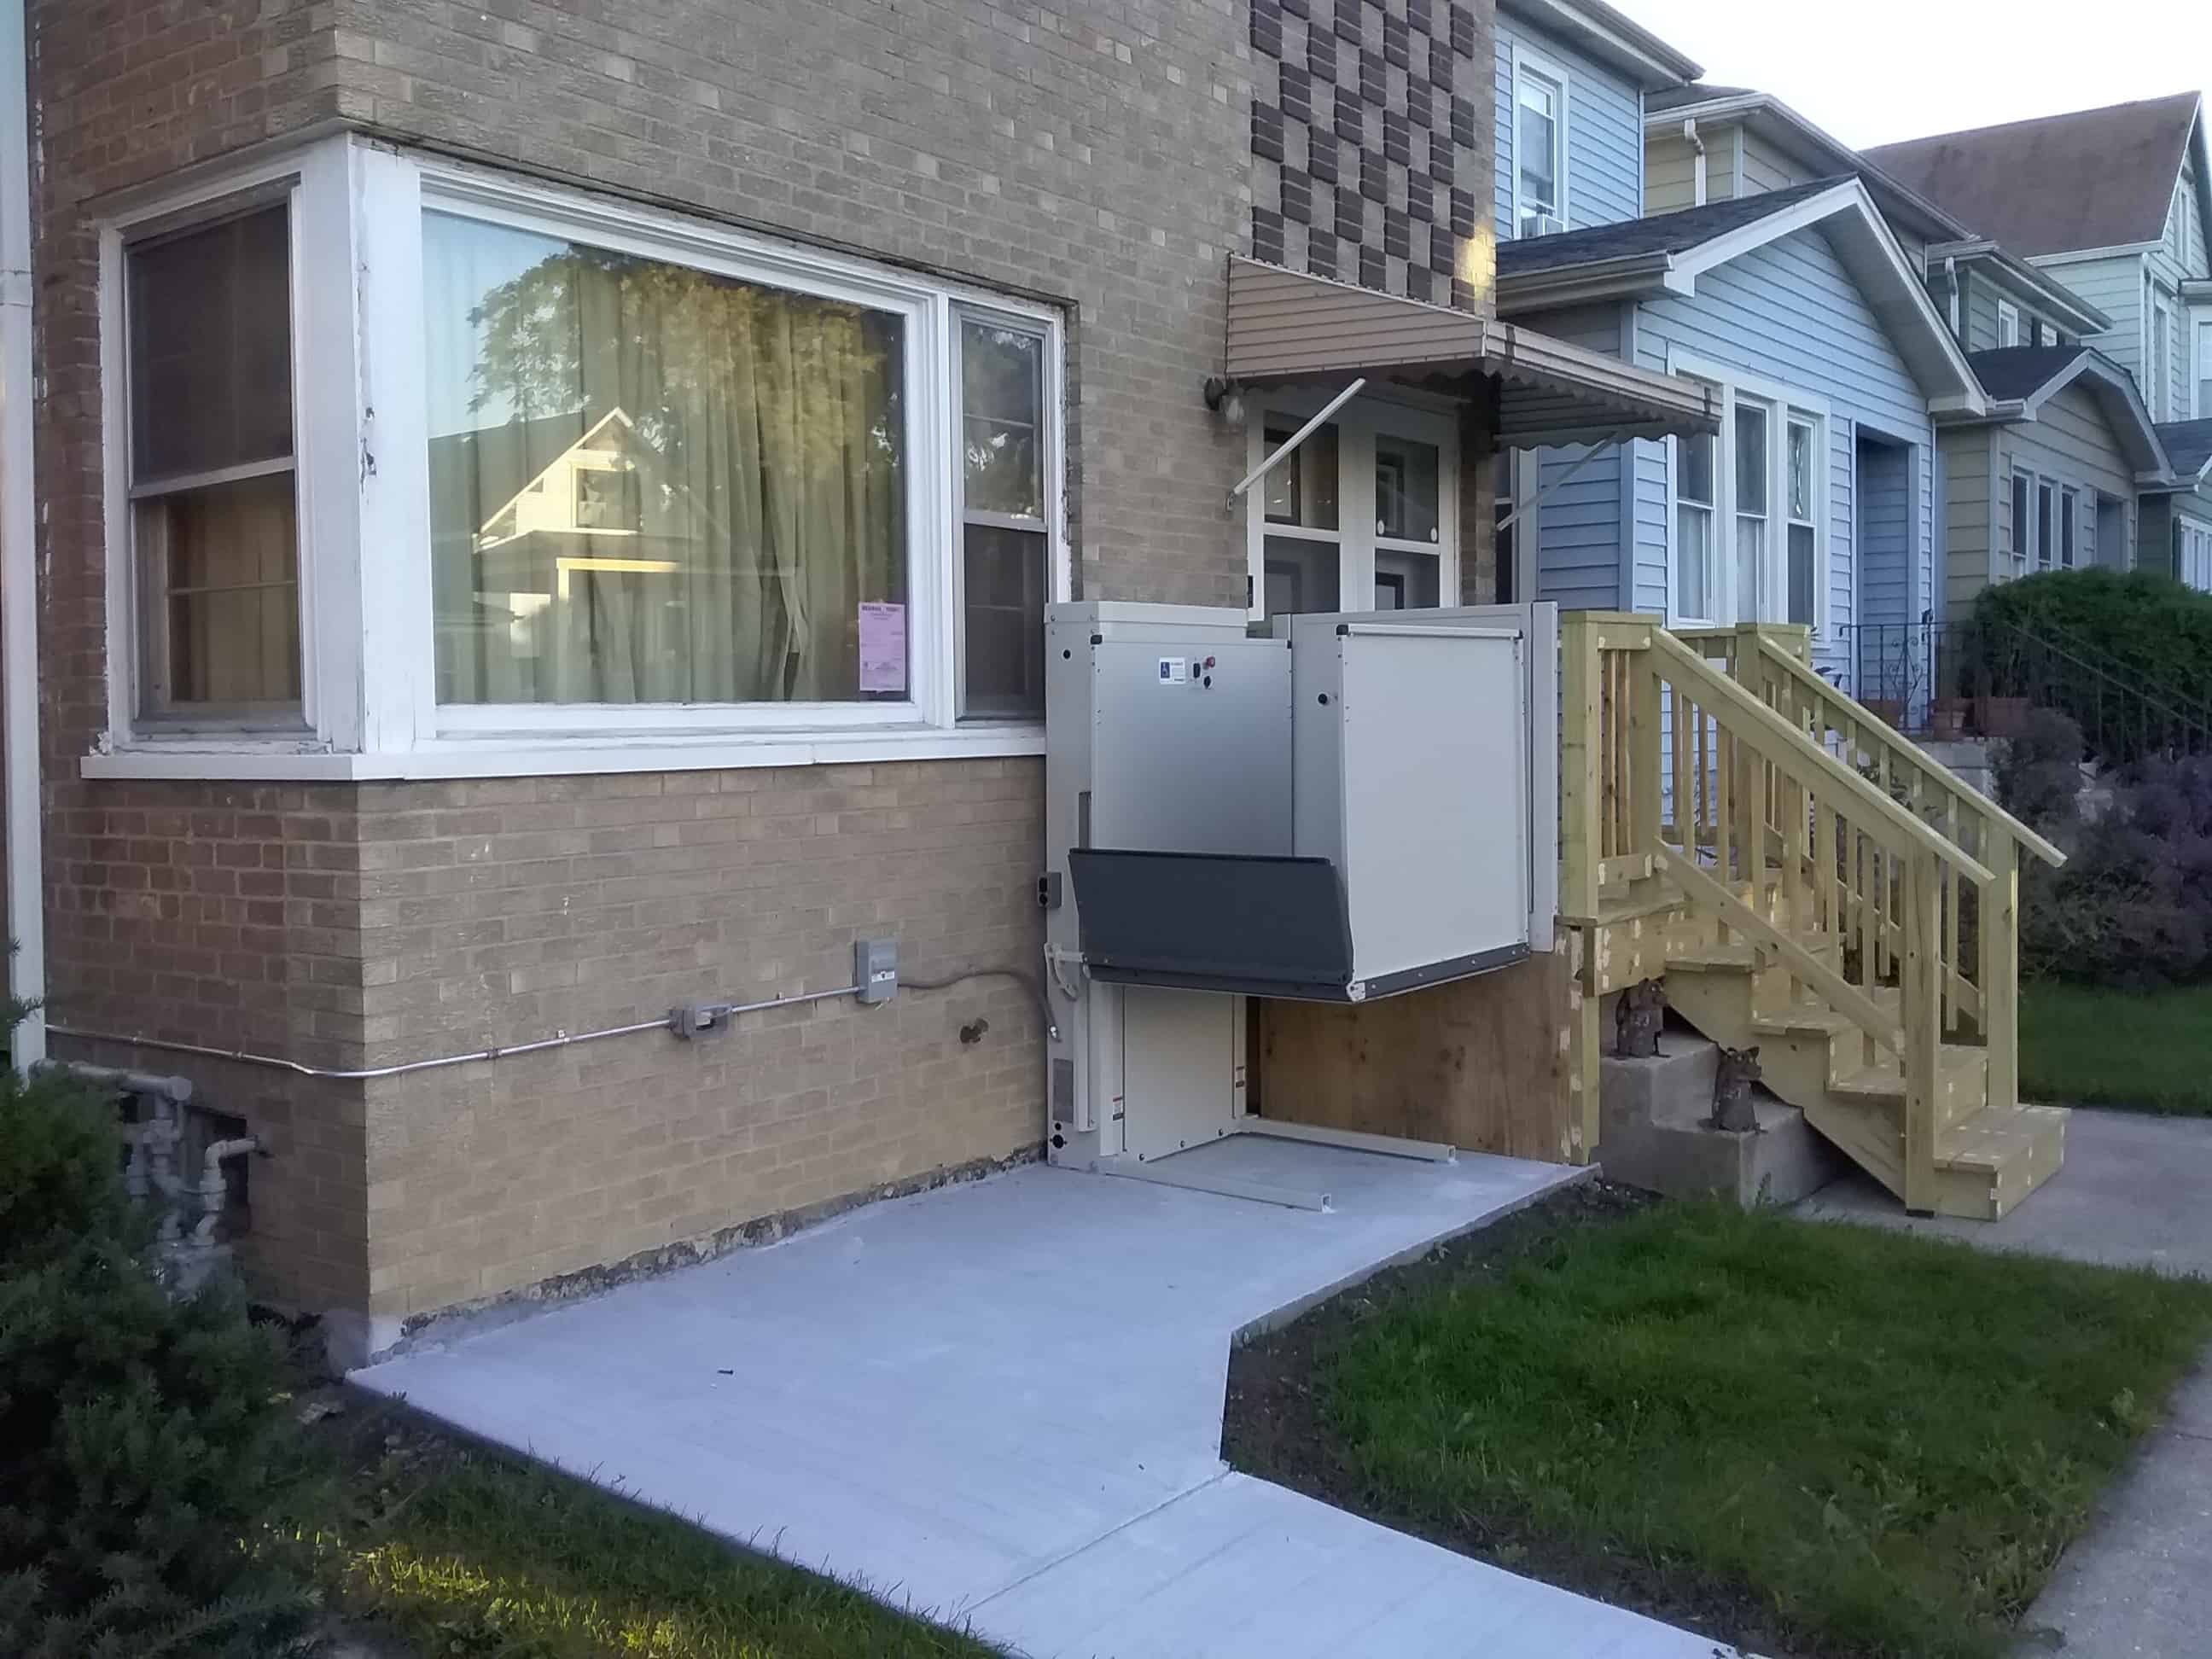 wheelchair lift installed to provide wheelchair access to raised home entrance